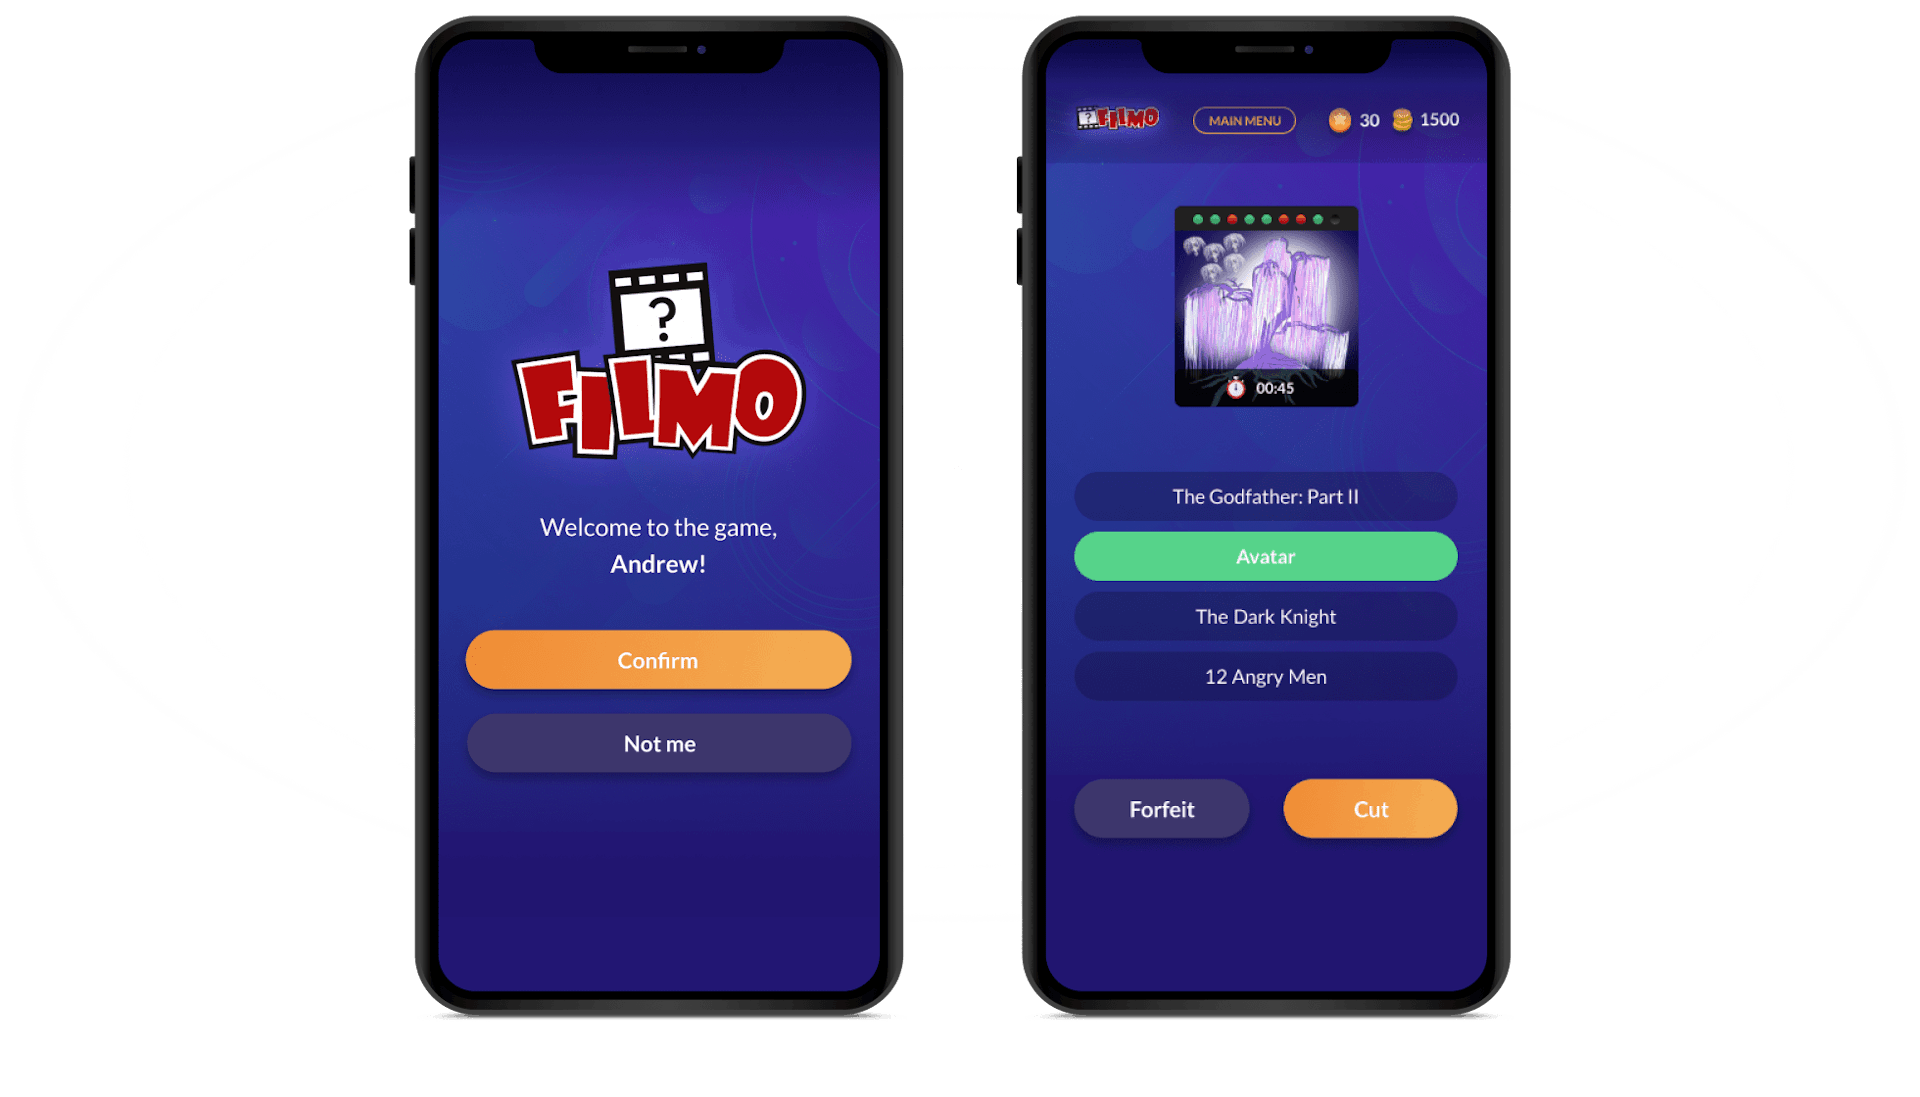 Filmo: Responsive web design for mobile and desktop versions of the quiz game